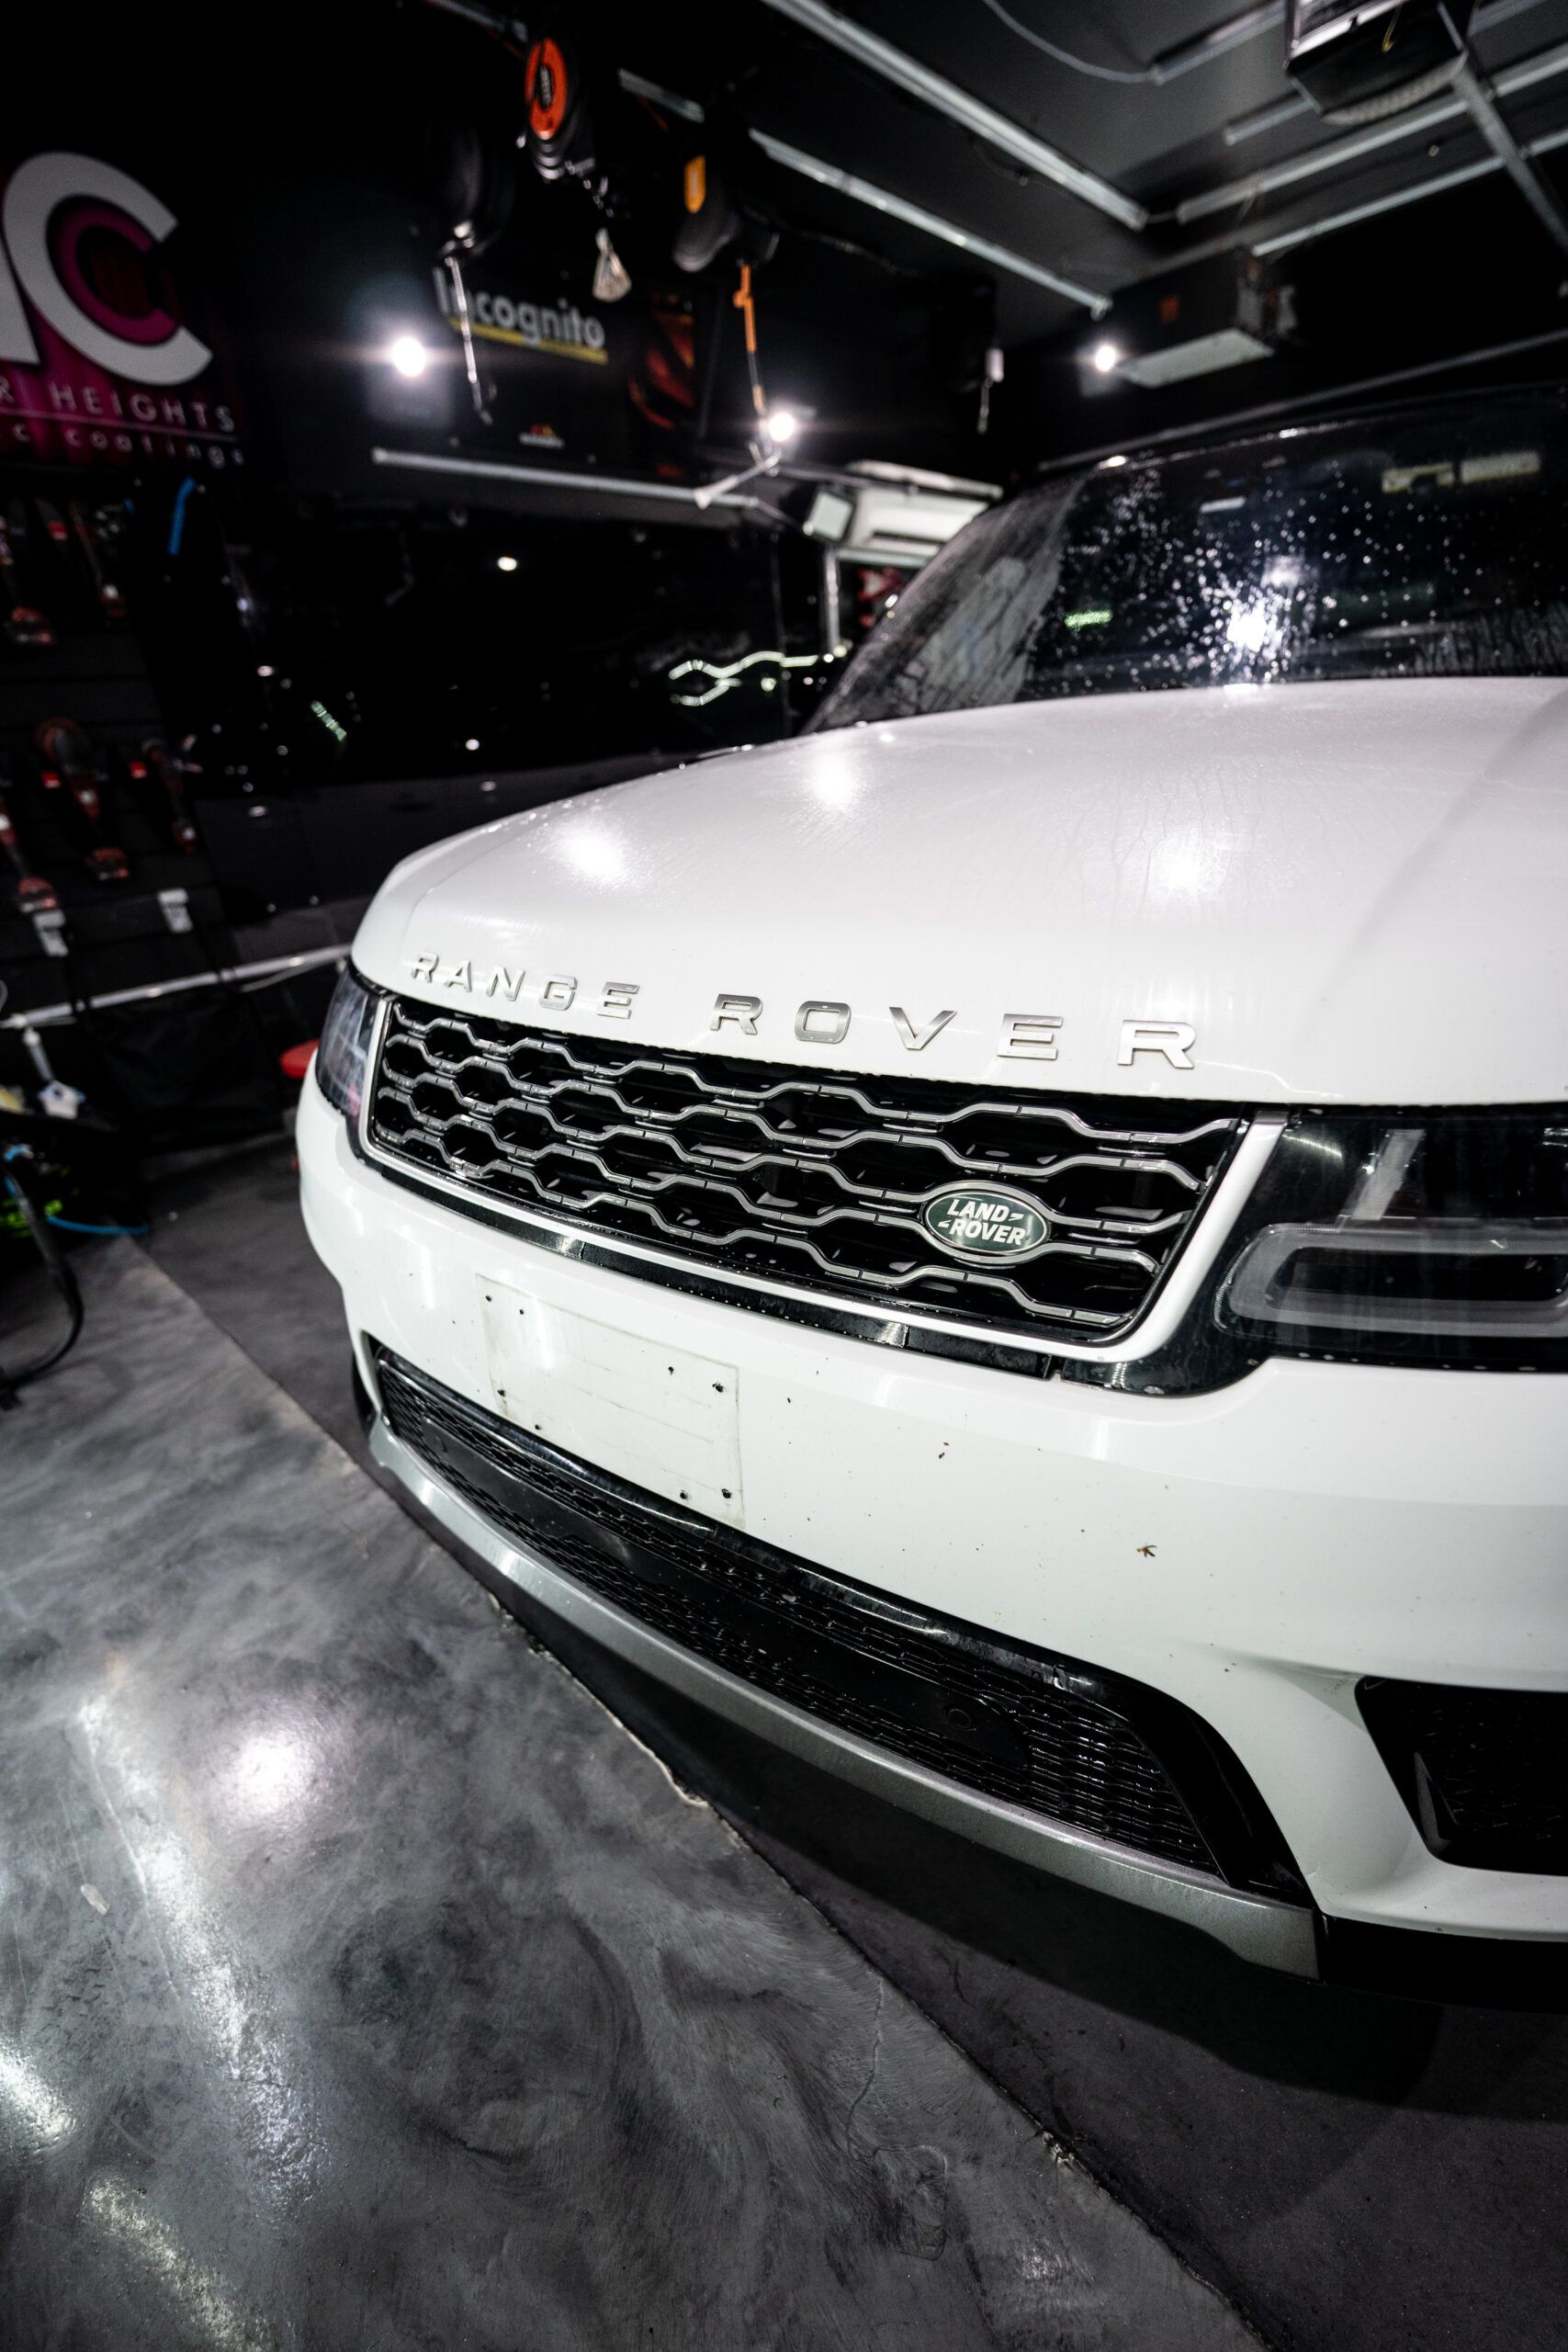 A white range rover is parked in a garage.